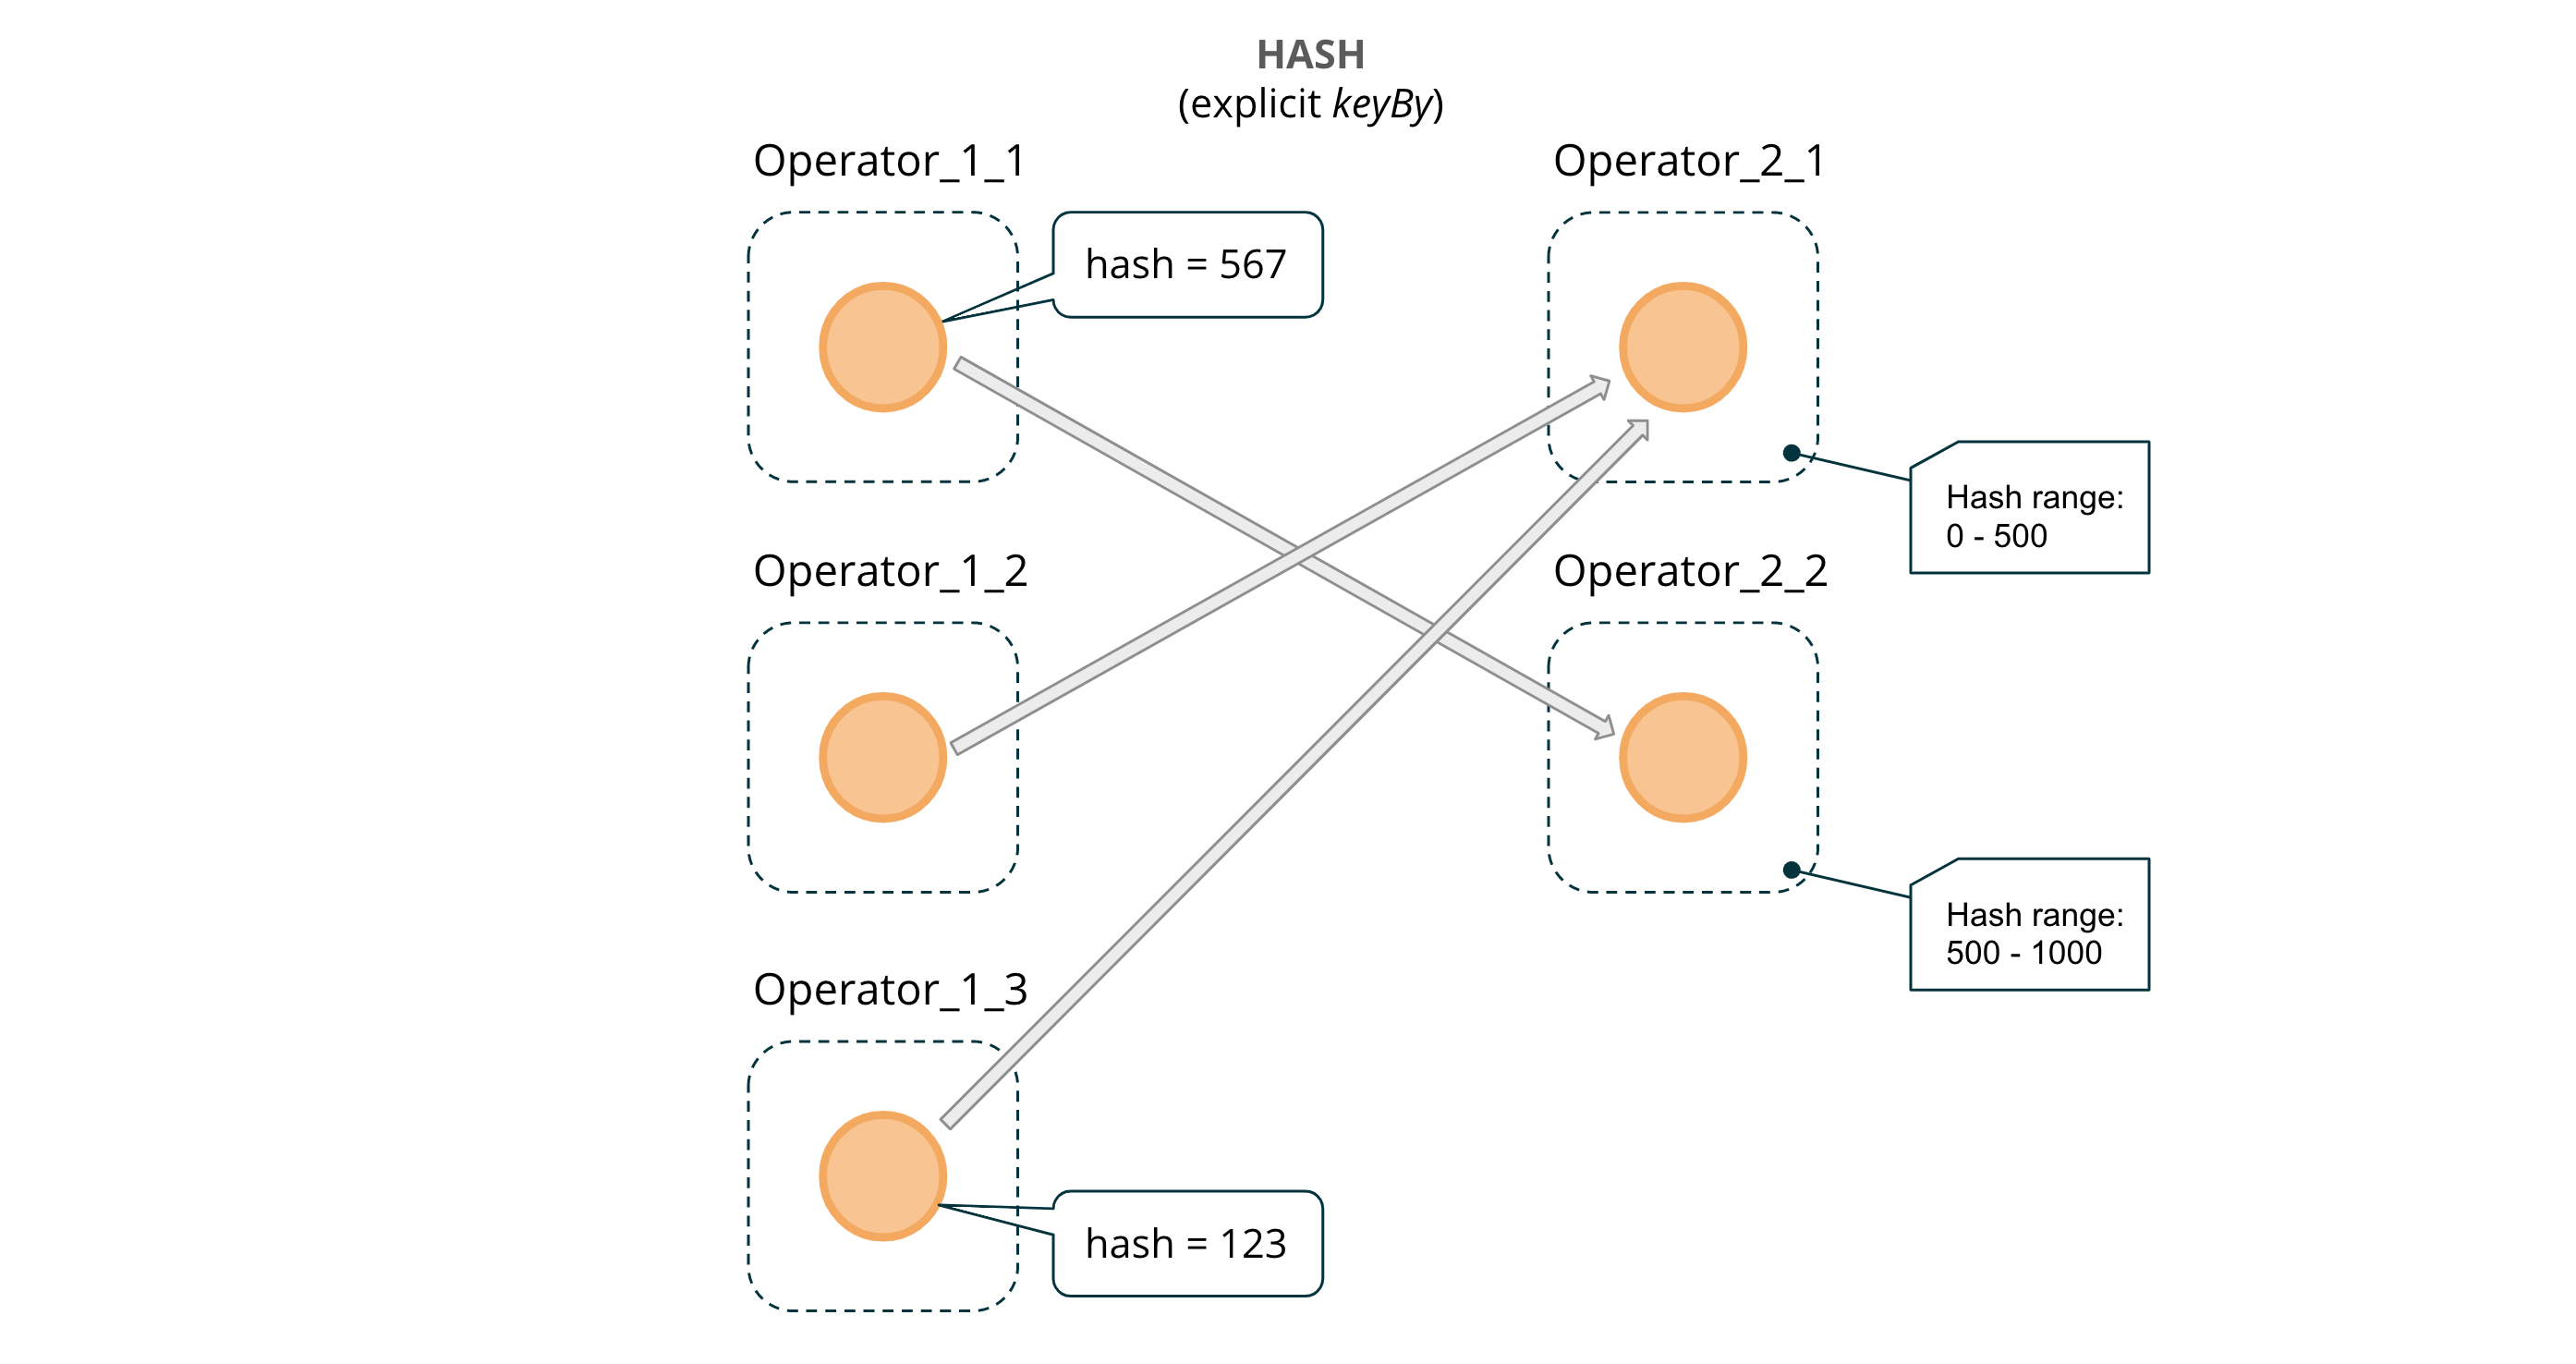 Figure 4: HASHED message passing across operator instances (via `keyBy`)